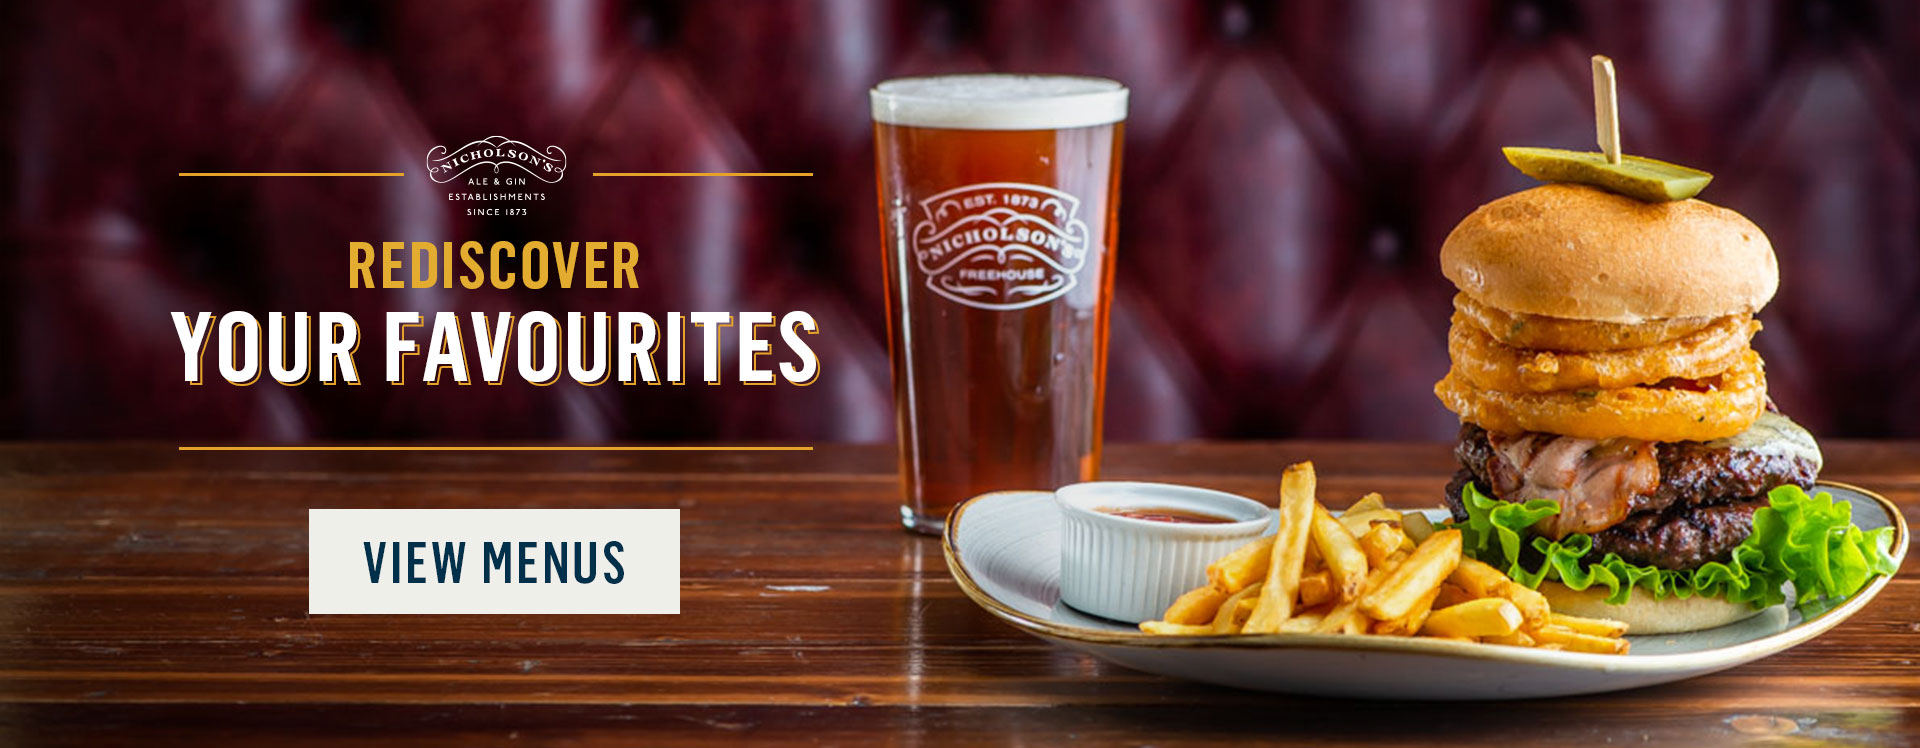 Rediscover your favourites at The White Lion